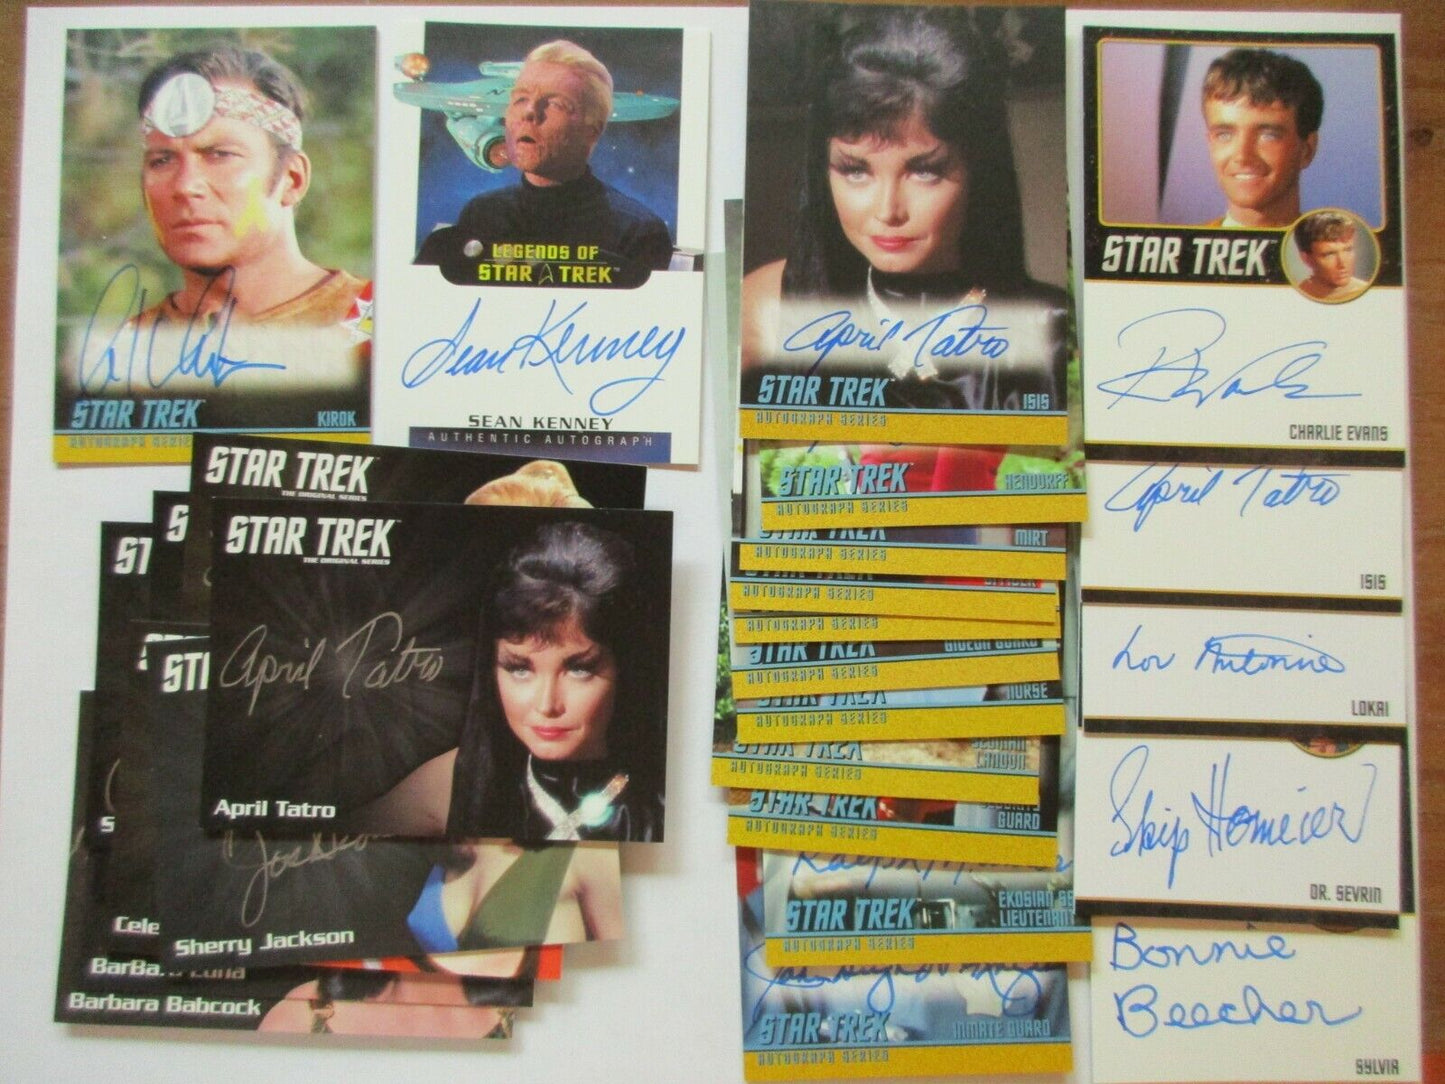 Star Trek The Original Series Archives & Inscriptions Master Set with Archive Box Exclusives (No Binder) (No Cut Signatures) (2020 Rittenhouse Archives)